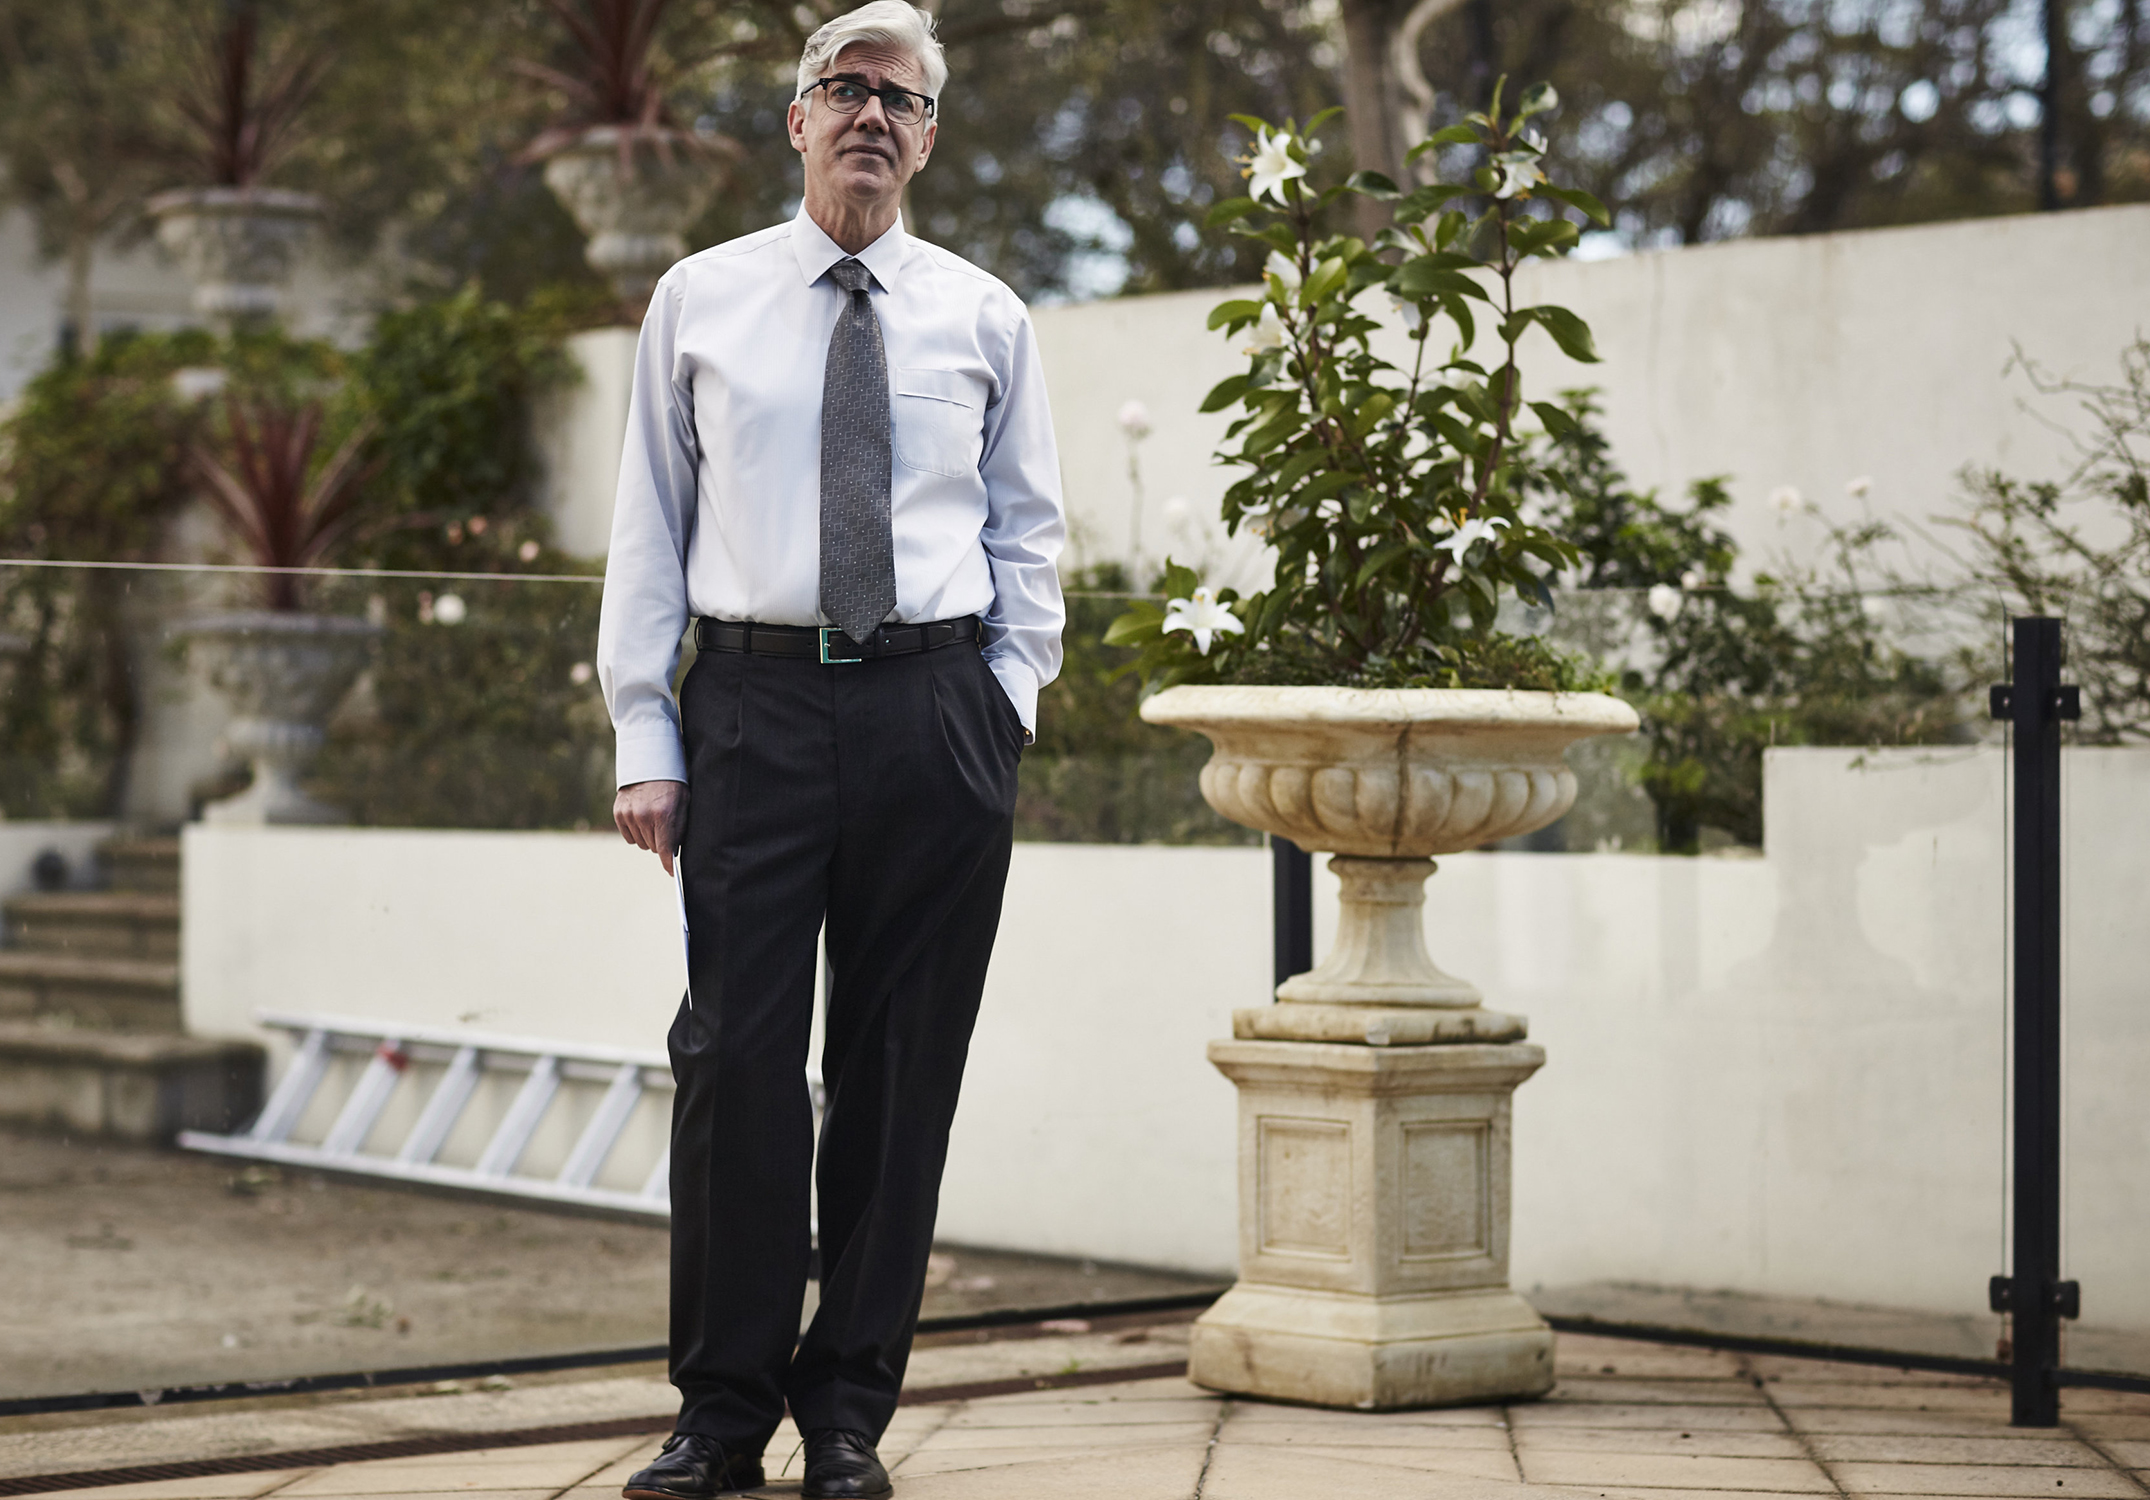   Shaun Micallef stars as Andrew Dugdale in The Ex-PM.  image - supplied/ABC 